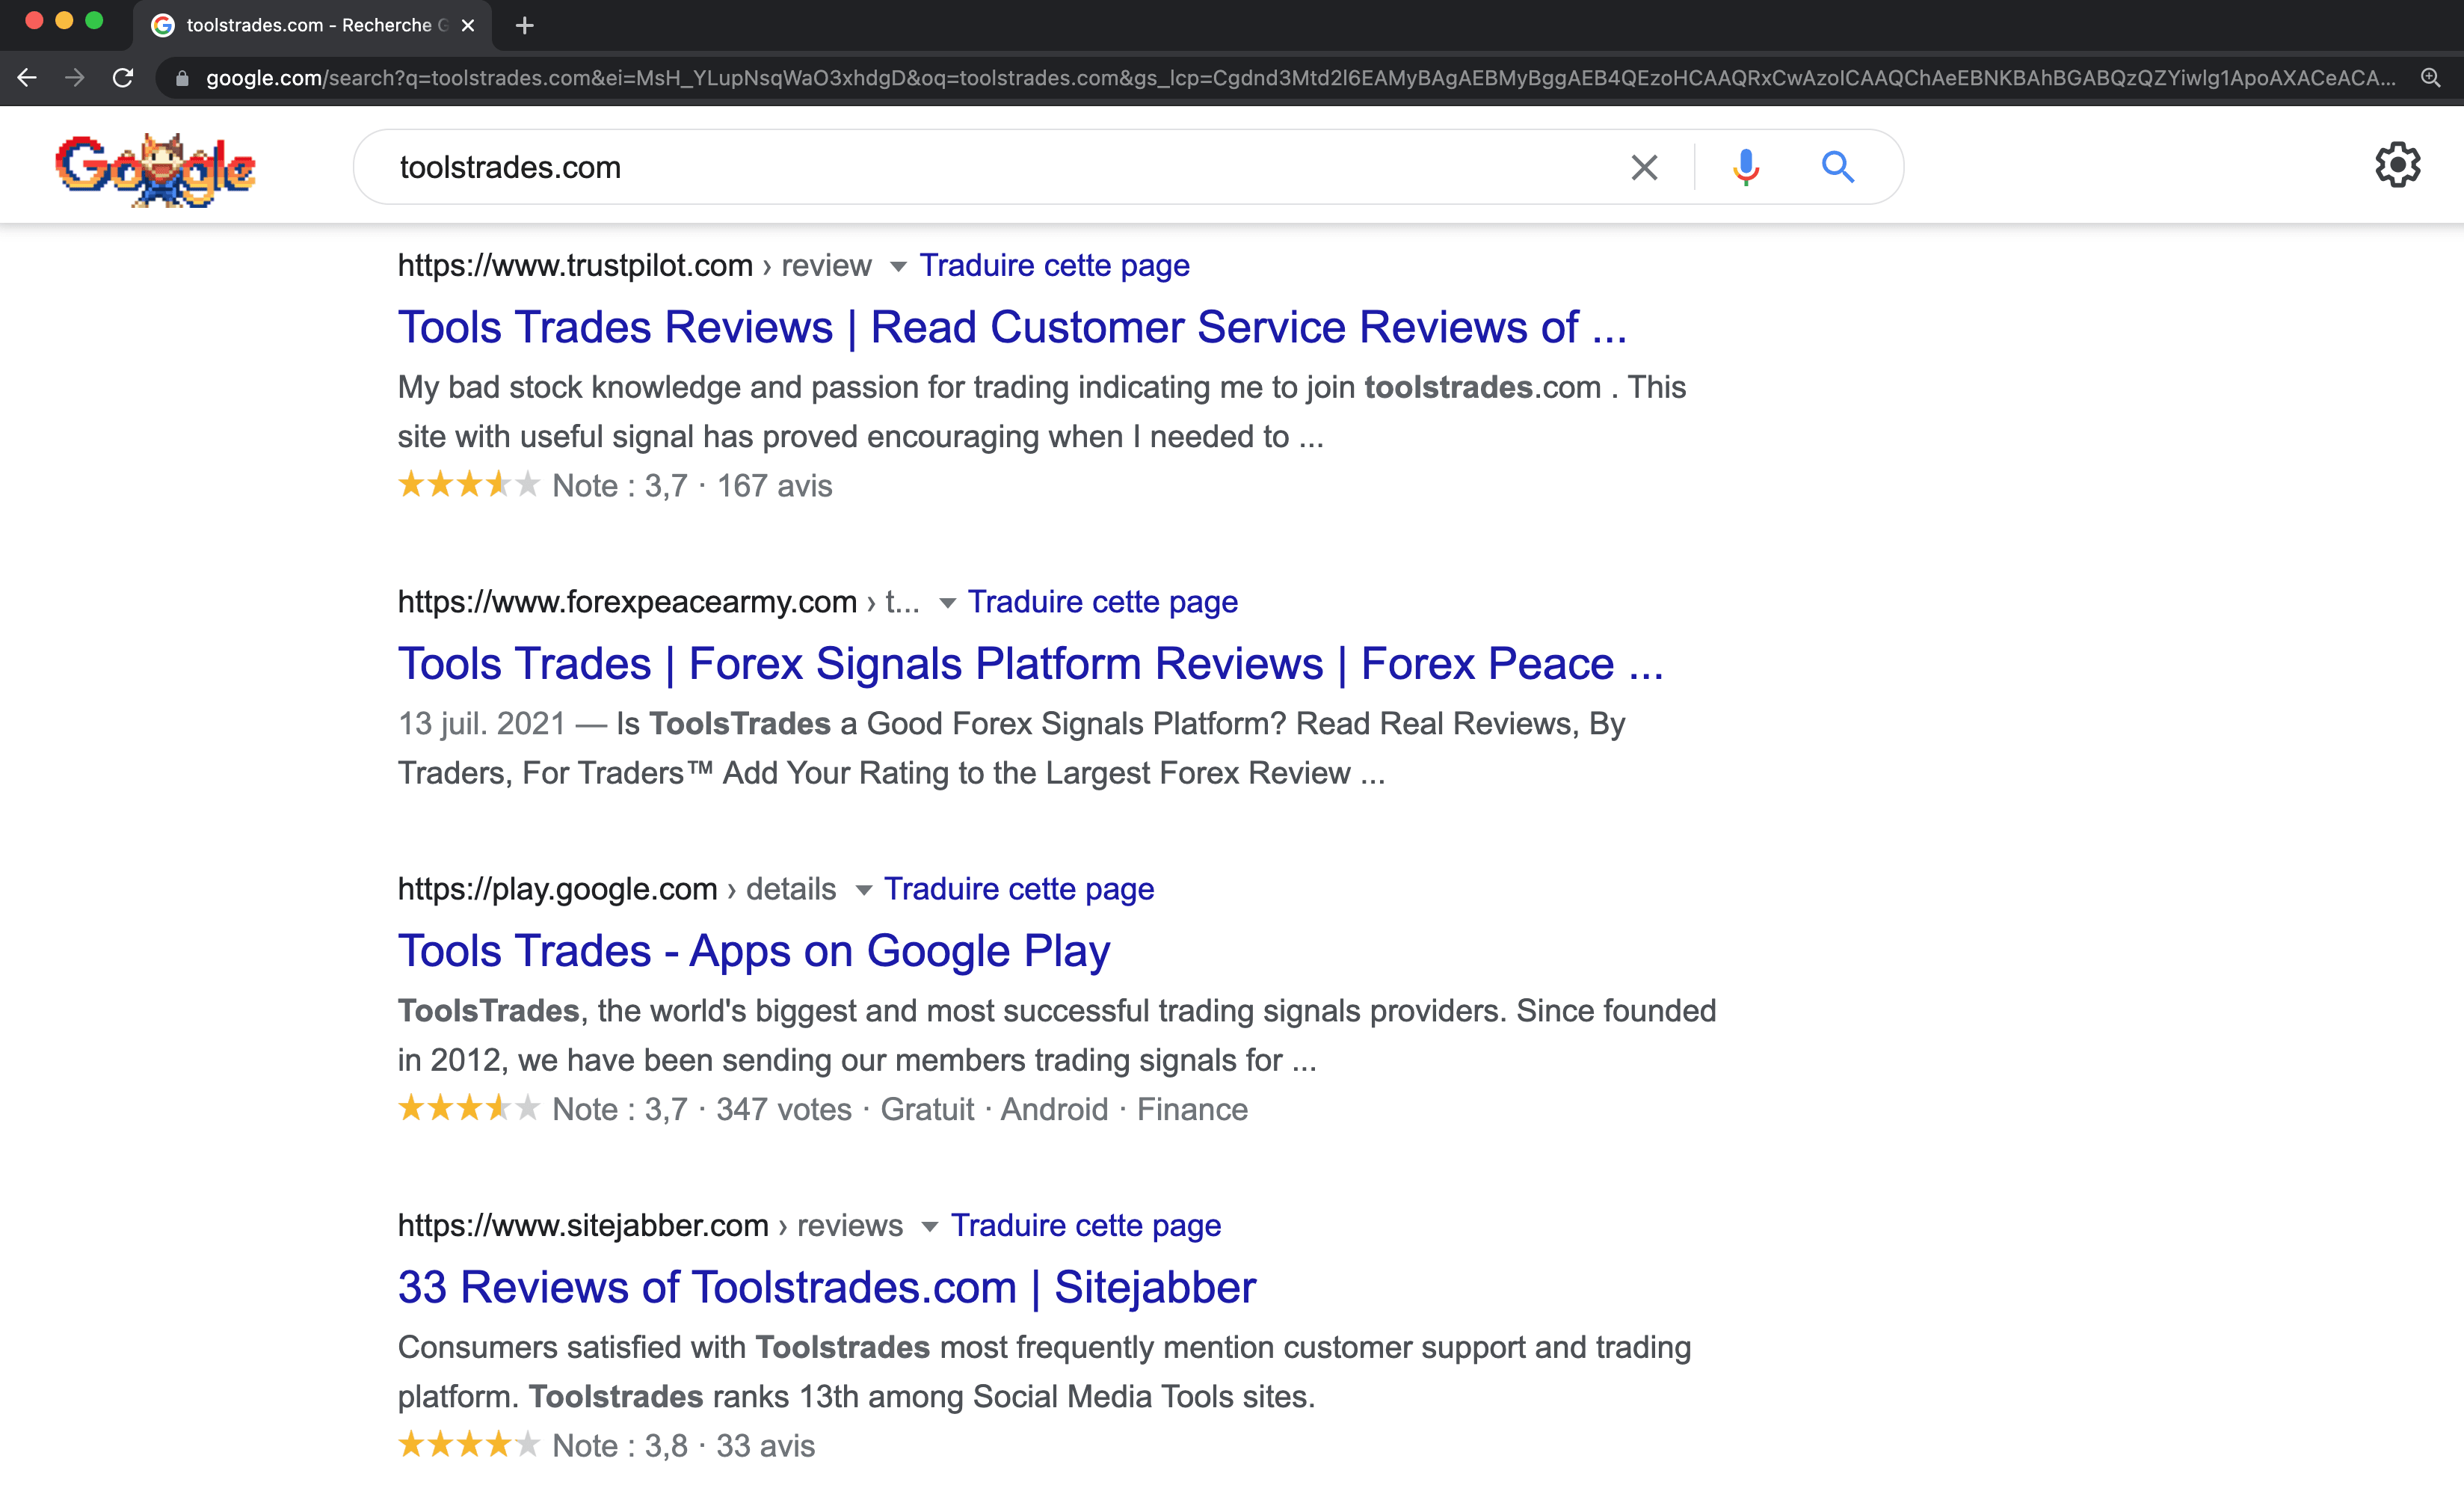 google toolstrades first page